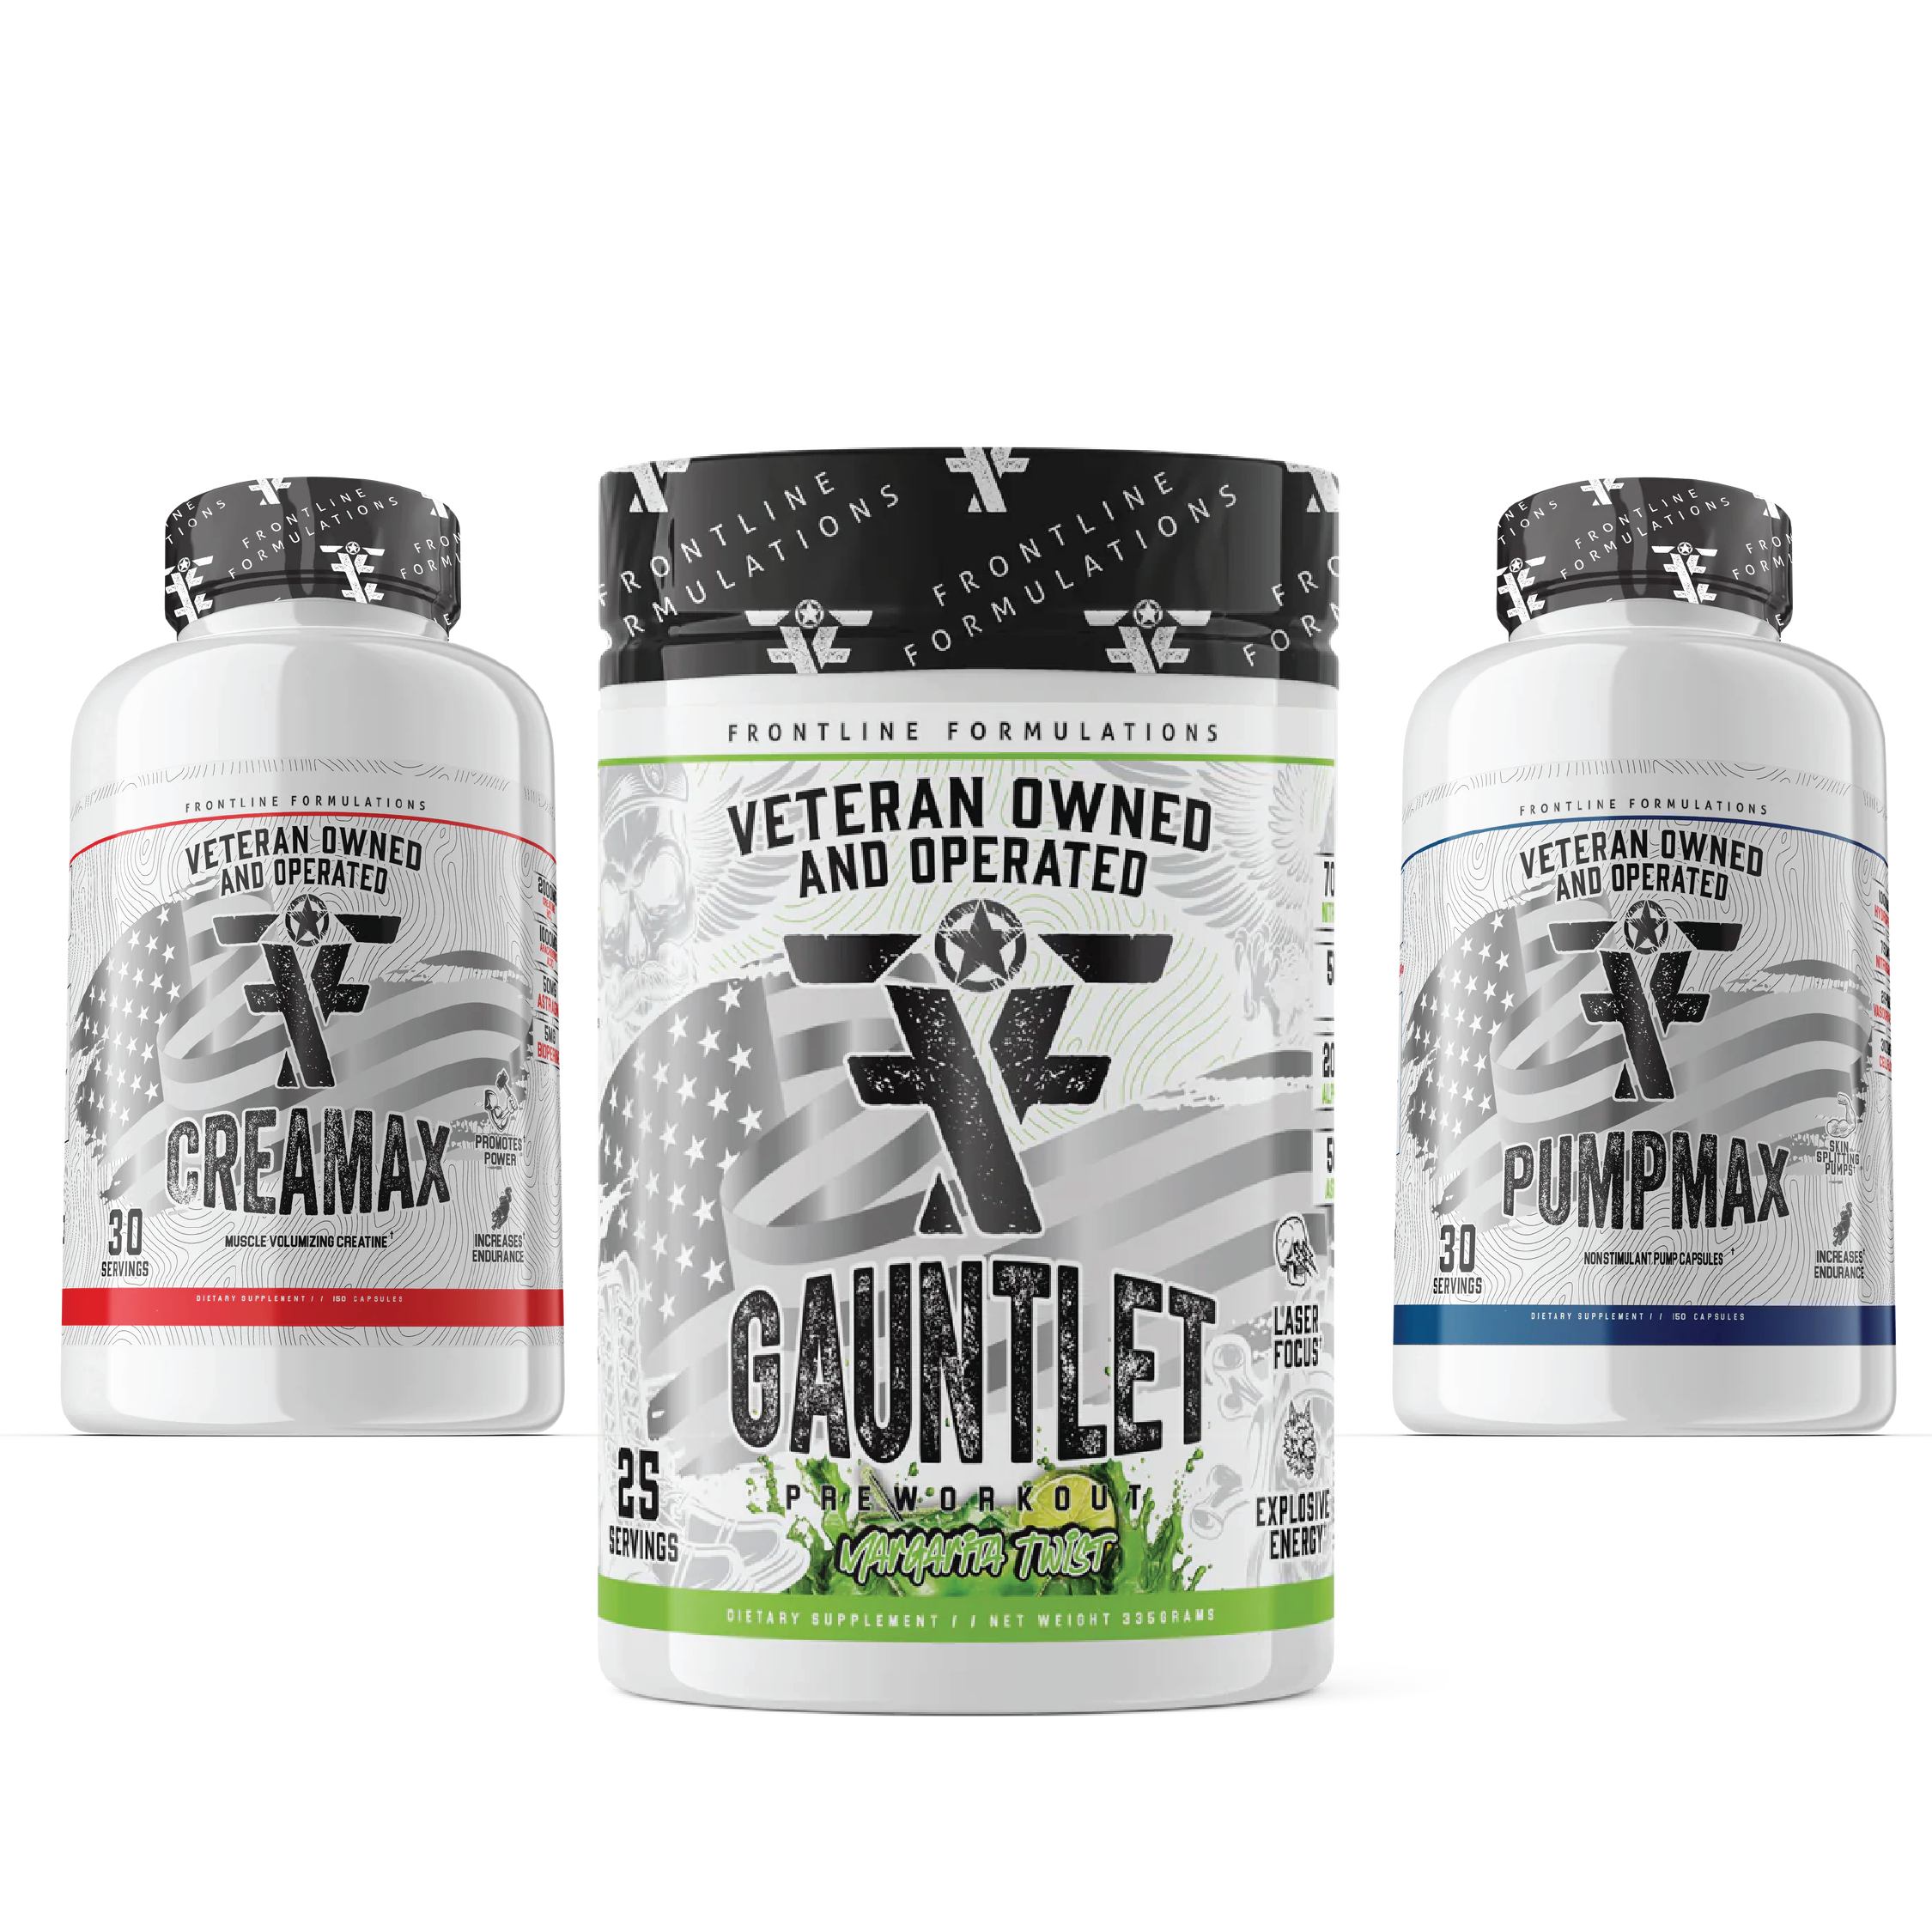 Gauntlet Pumpmax Creamax Stack Gauntlet Gauntlet is quickly becoming one of the most sought-after mid-stim pres on the market! Boasting 275mg of caffeine combined with 50mg of astragin for almost instant absorption! 300mg of L-Theanine to prevent jitters